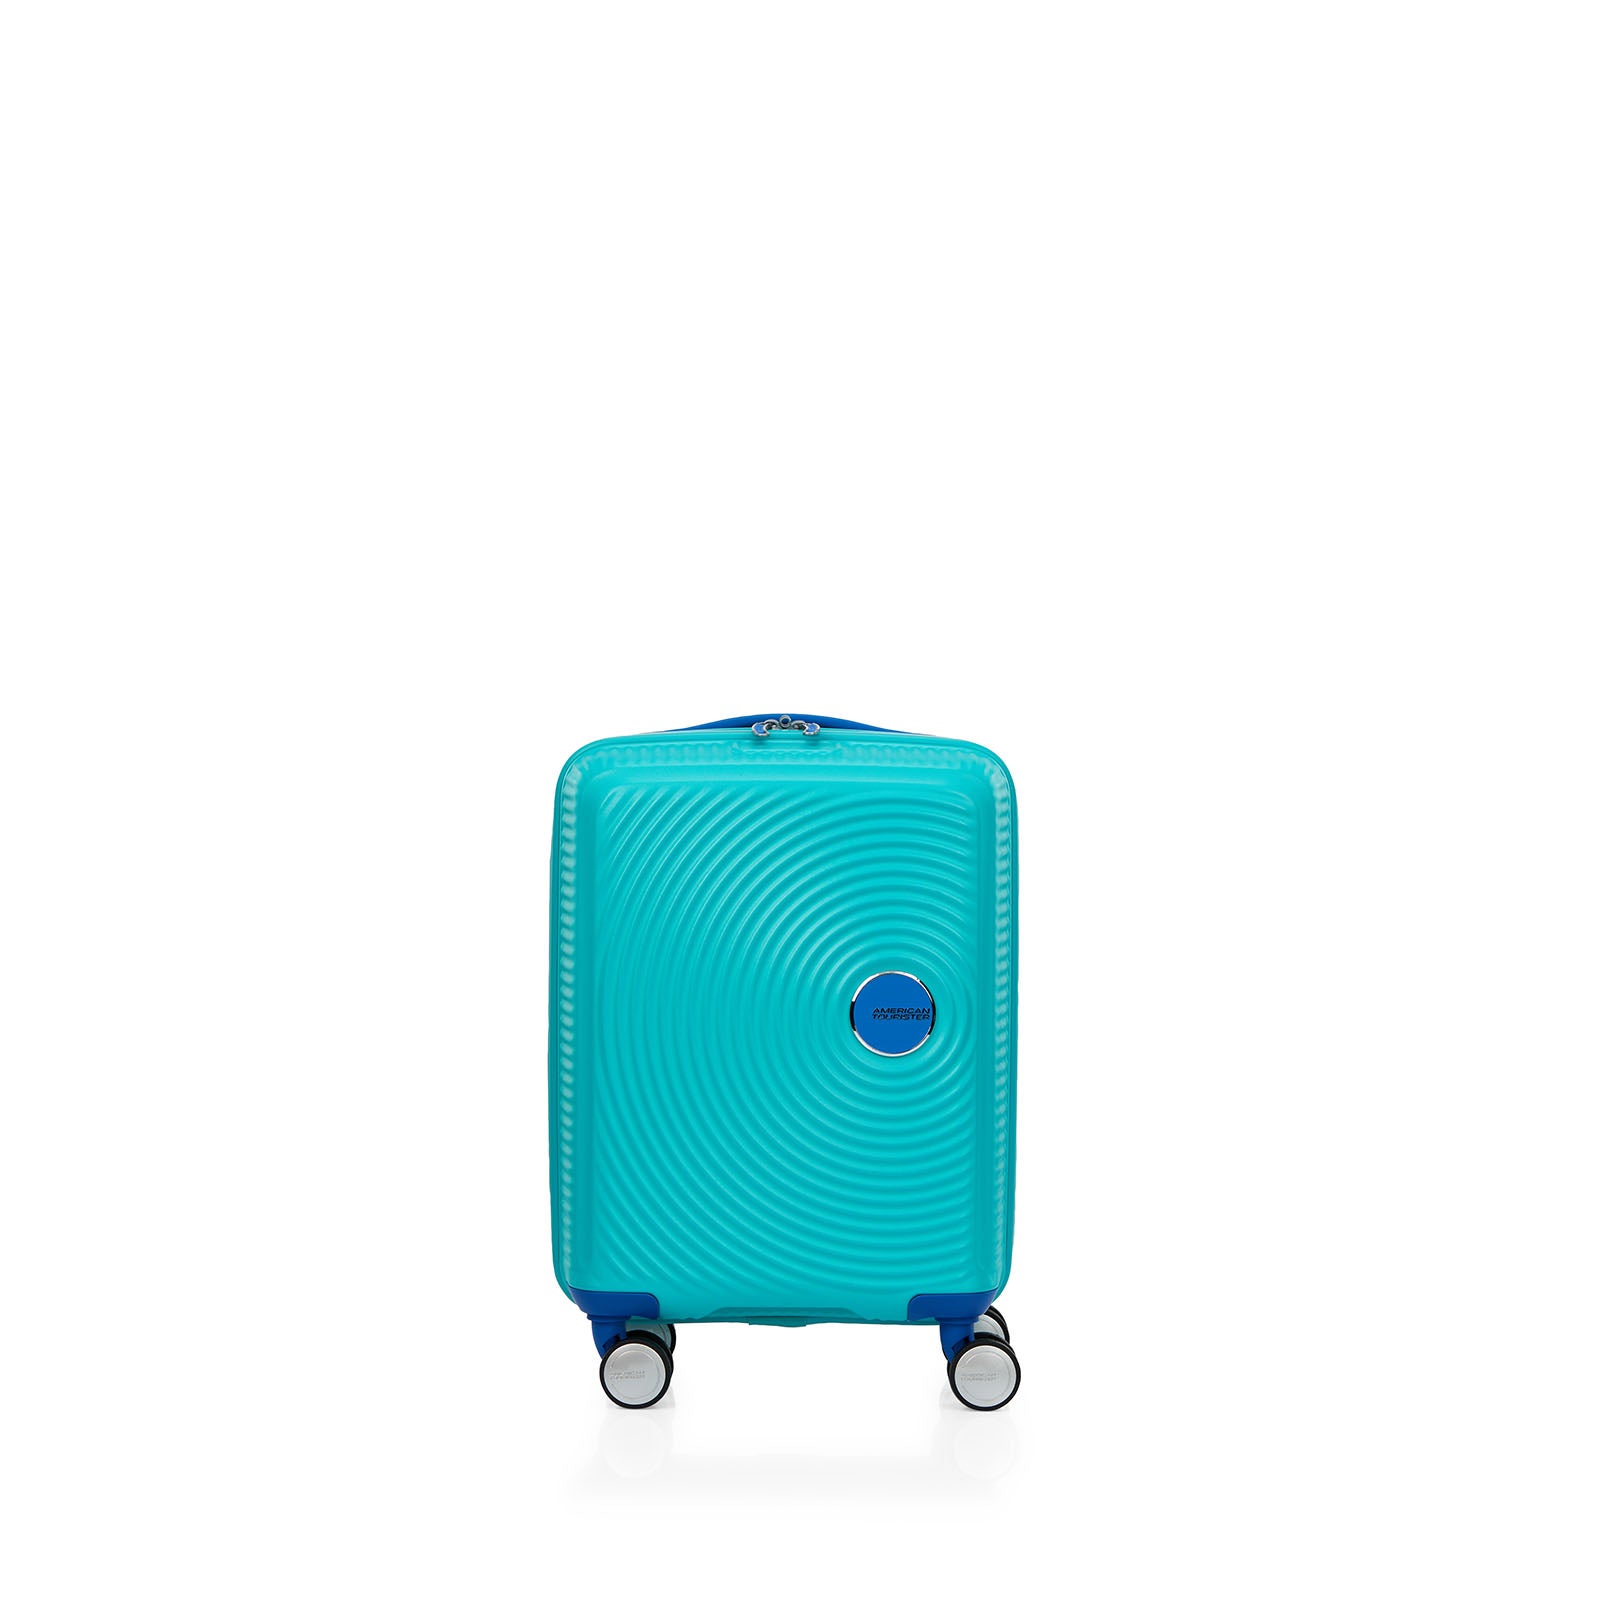 American-Tourister-Little-Curio-47cm-Carry-On-Suitcase-Teal-Blue-Front